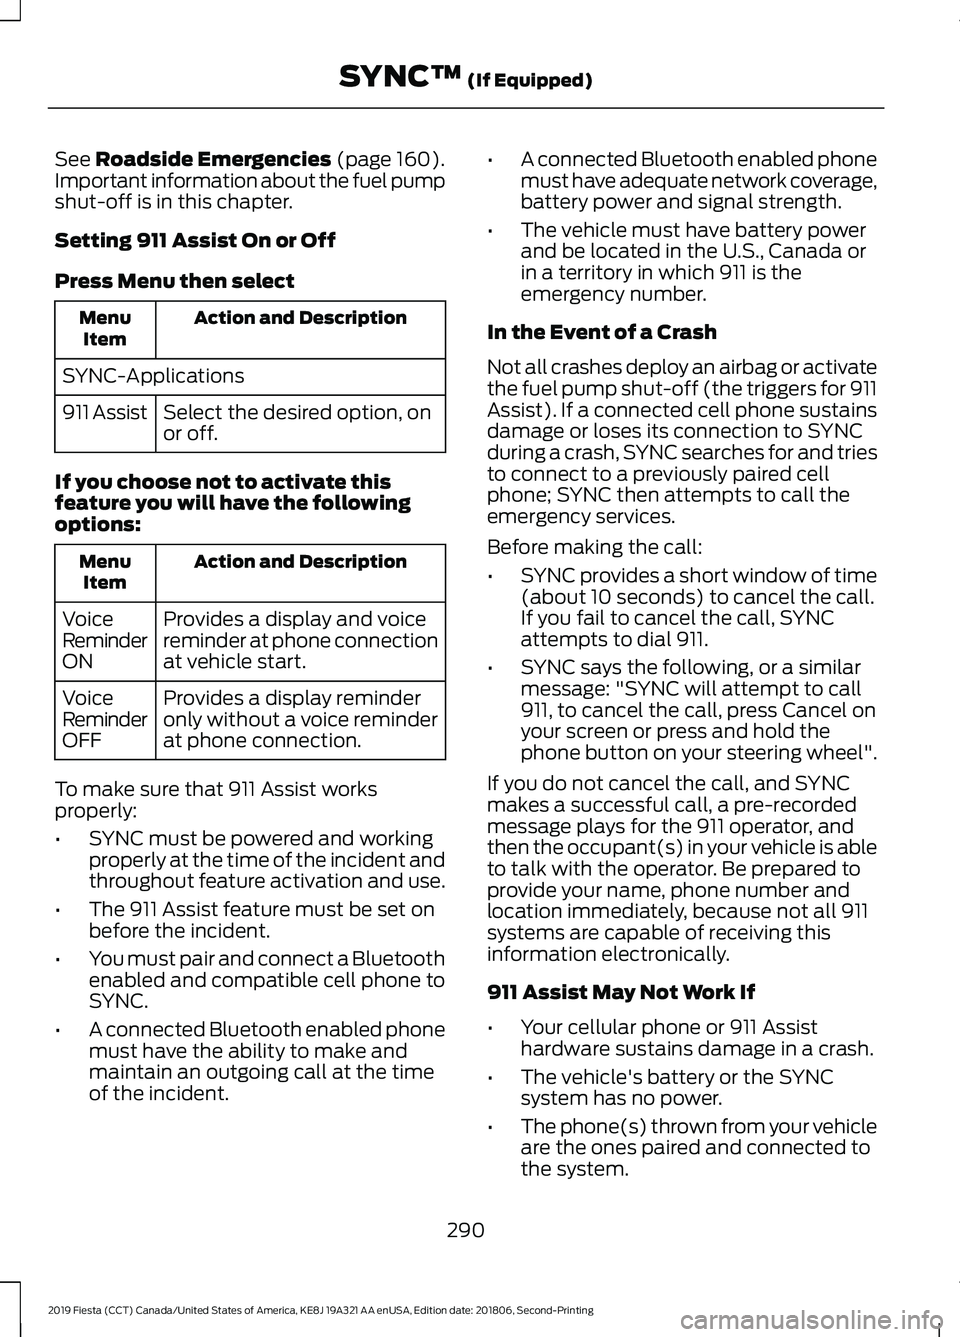 FORD FIESTA 2019  Owners Manual See Roadside Emergencies (page 160).
Important information about the fuel pump
shut-off is in this chapter.
Setting 911 Assist On or Off
Press Menu then select Action and Description
Menu
Item
SYNC-Ap